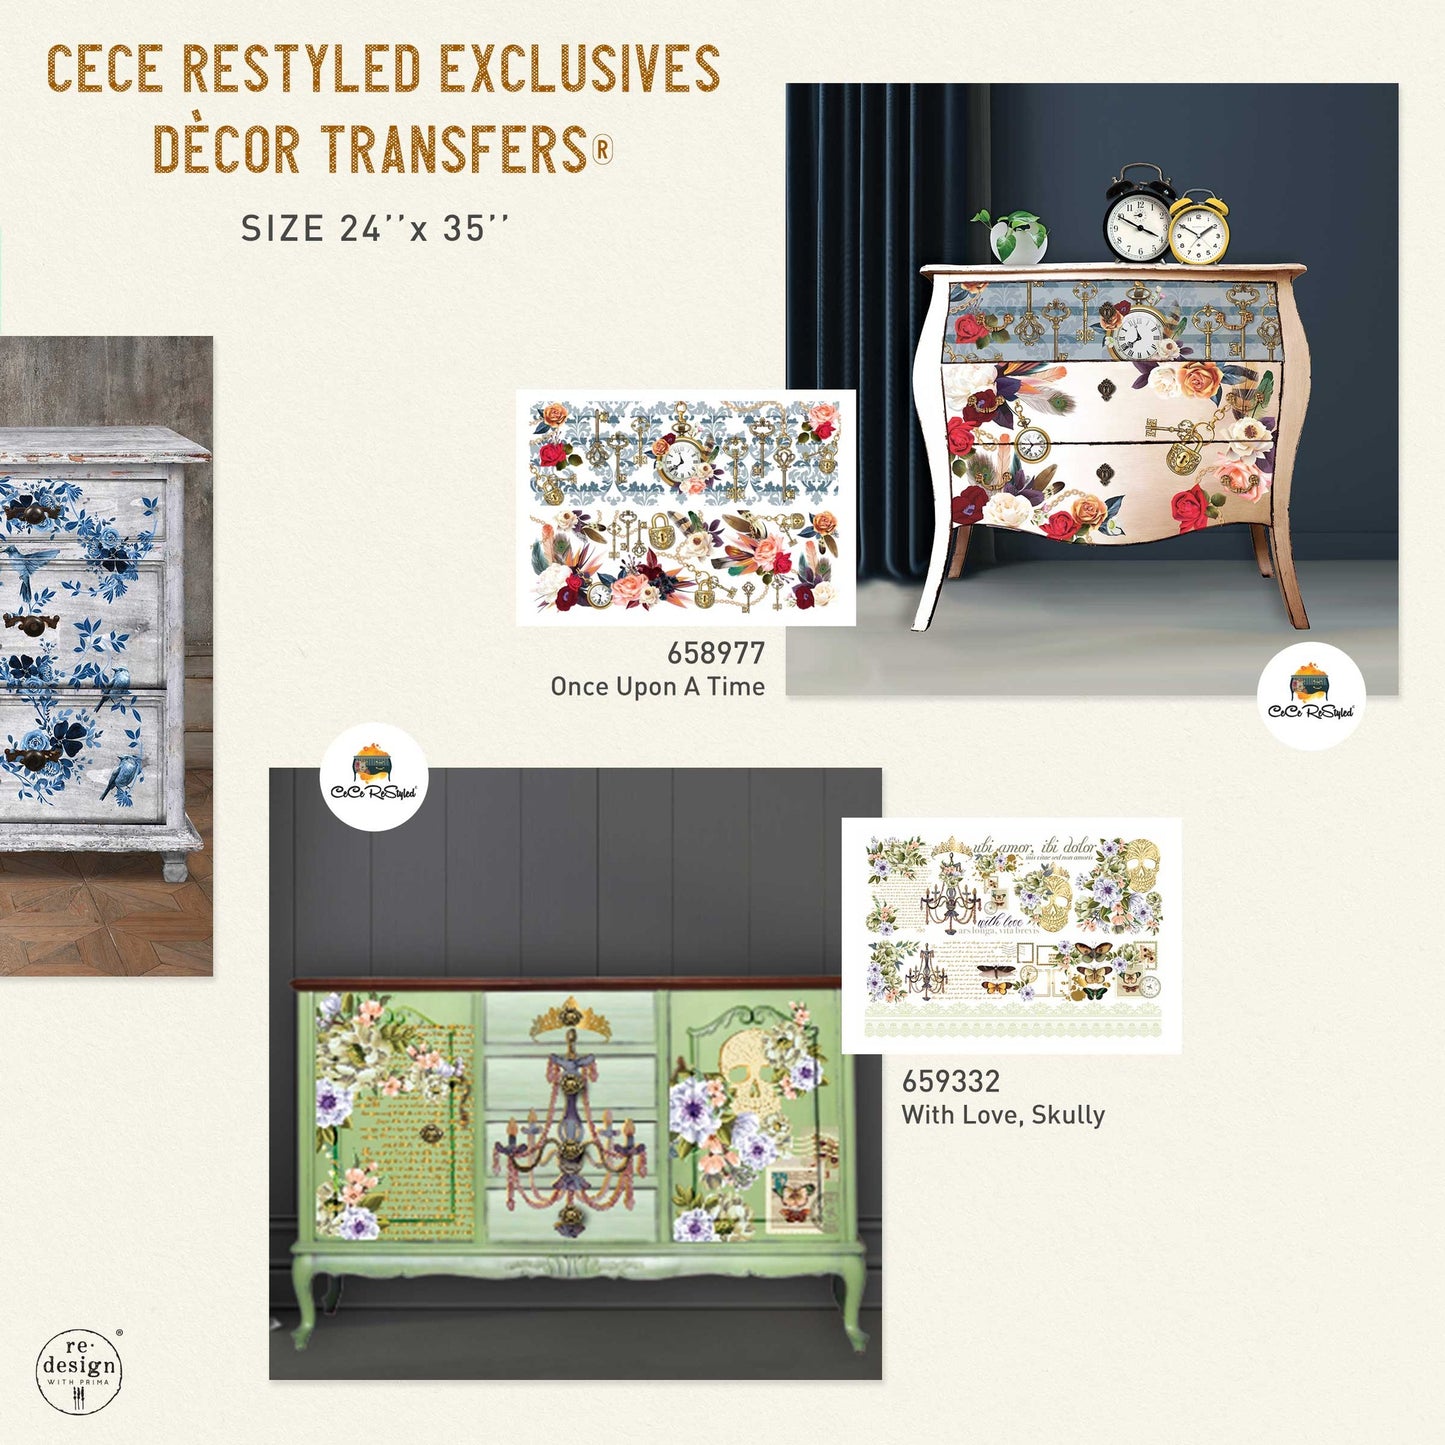 CeCe - Once Upon A Time - Redesign Decor Transfer